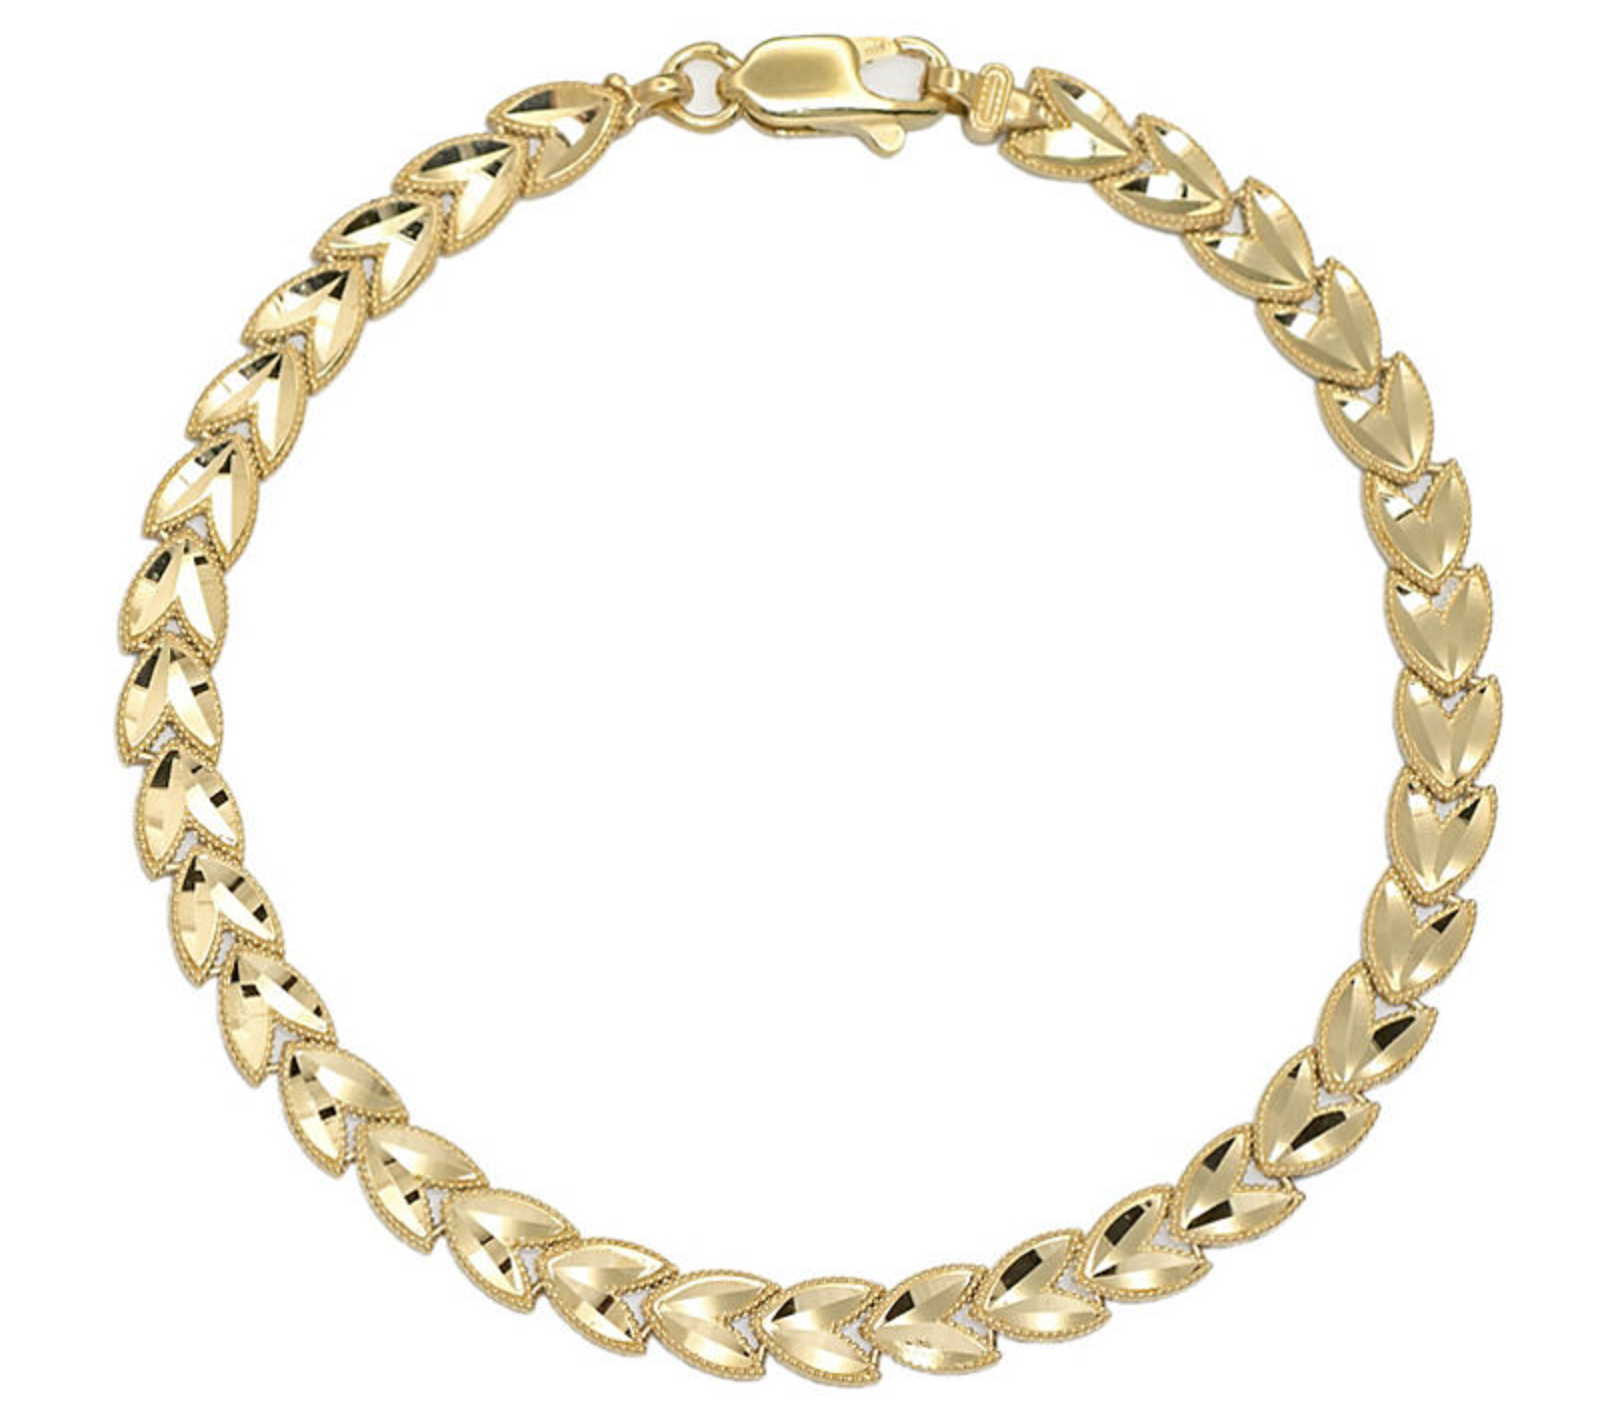 Gold bracelet with clasp